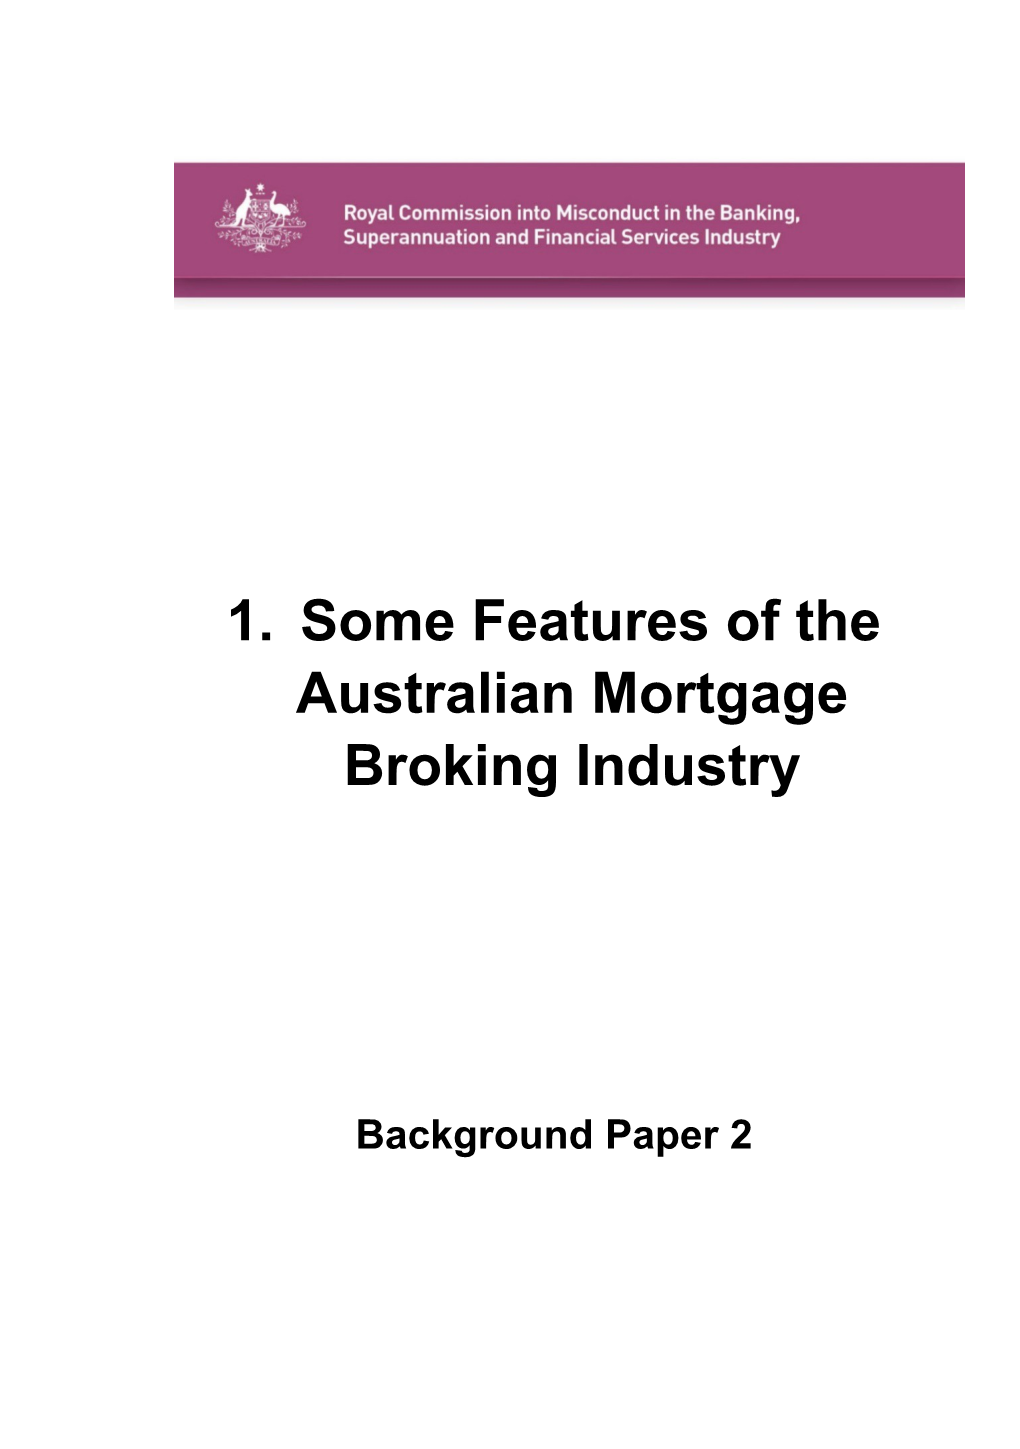 Some Features of the Australian Mortgagebroking Industry